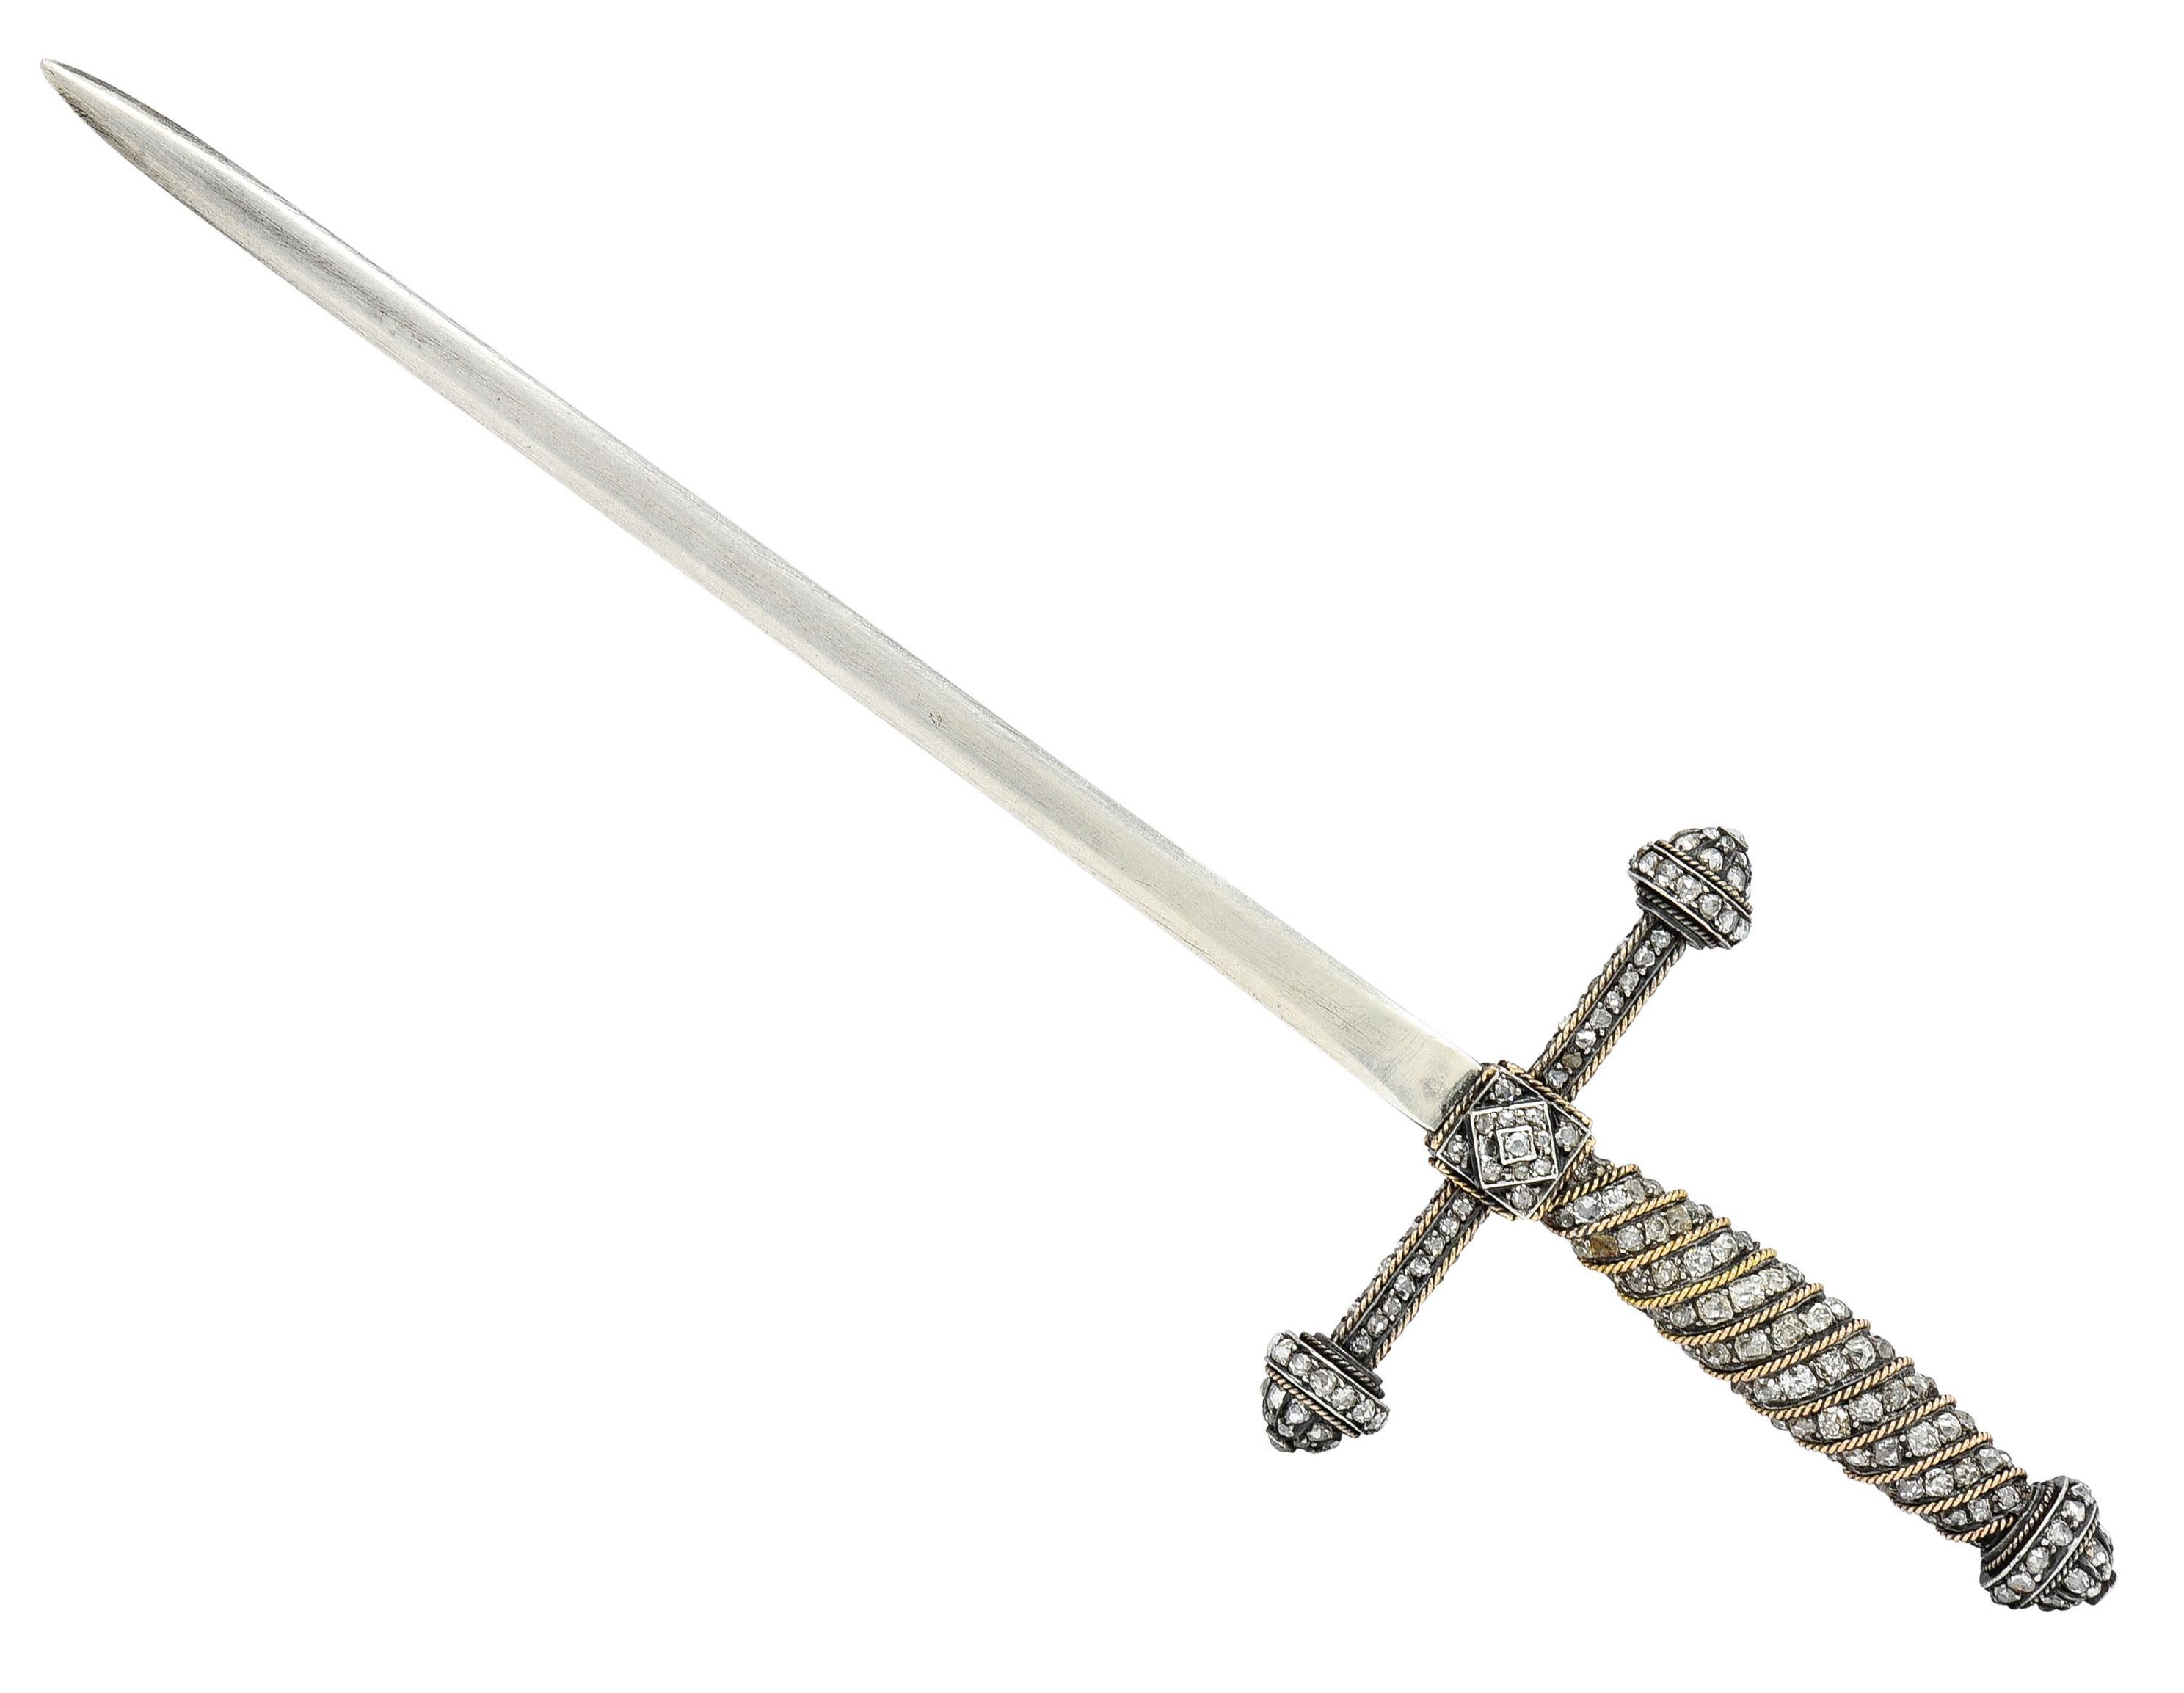 Letter opener is designed as a sword with an elongated blade

Hilt is ornate with a spiraling yellow gold twisted rope motif

Set throughout with rose cut and old mine cut diamonds - quality is consistent with age

Blade has French maker's mark and